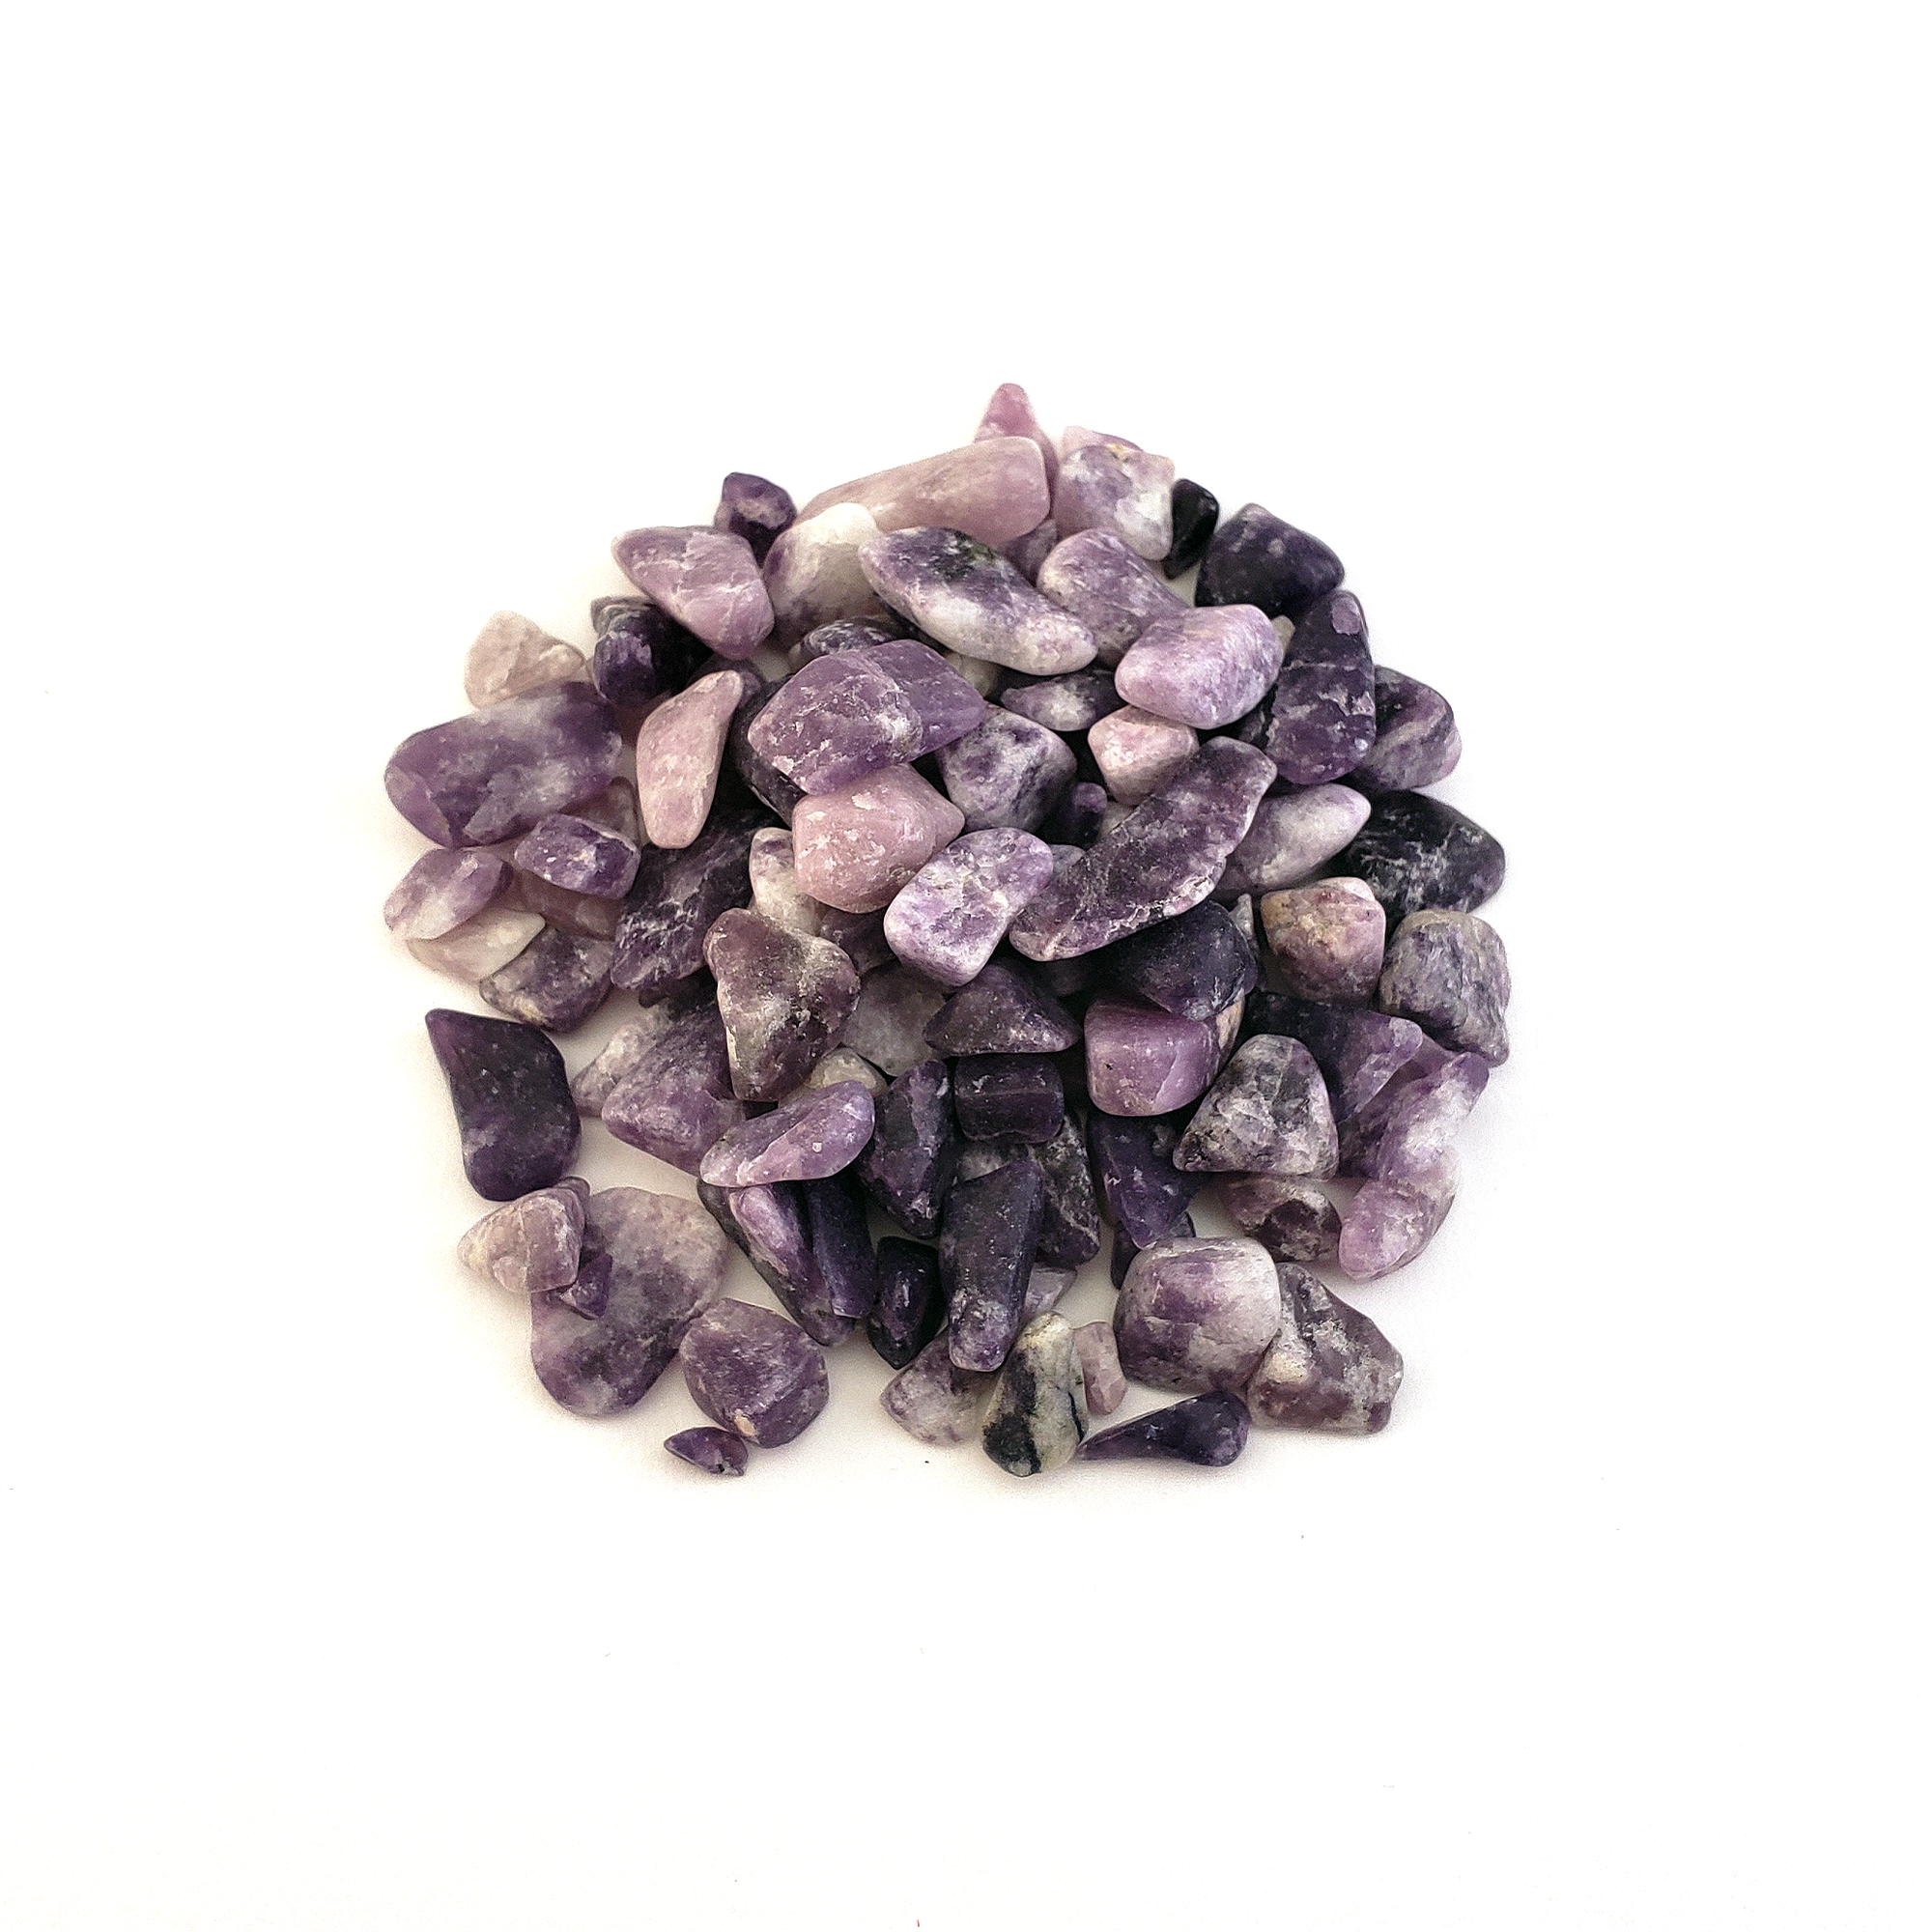 Lepidolite Natural Gemstone Chips By the Ounce - Gemstone Chips on White Background